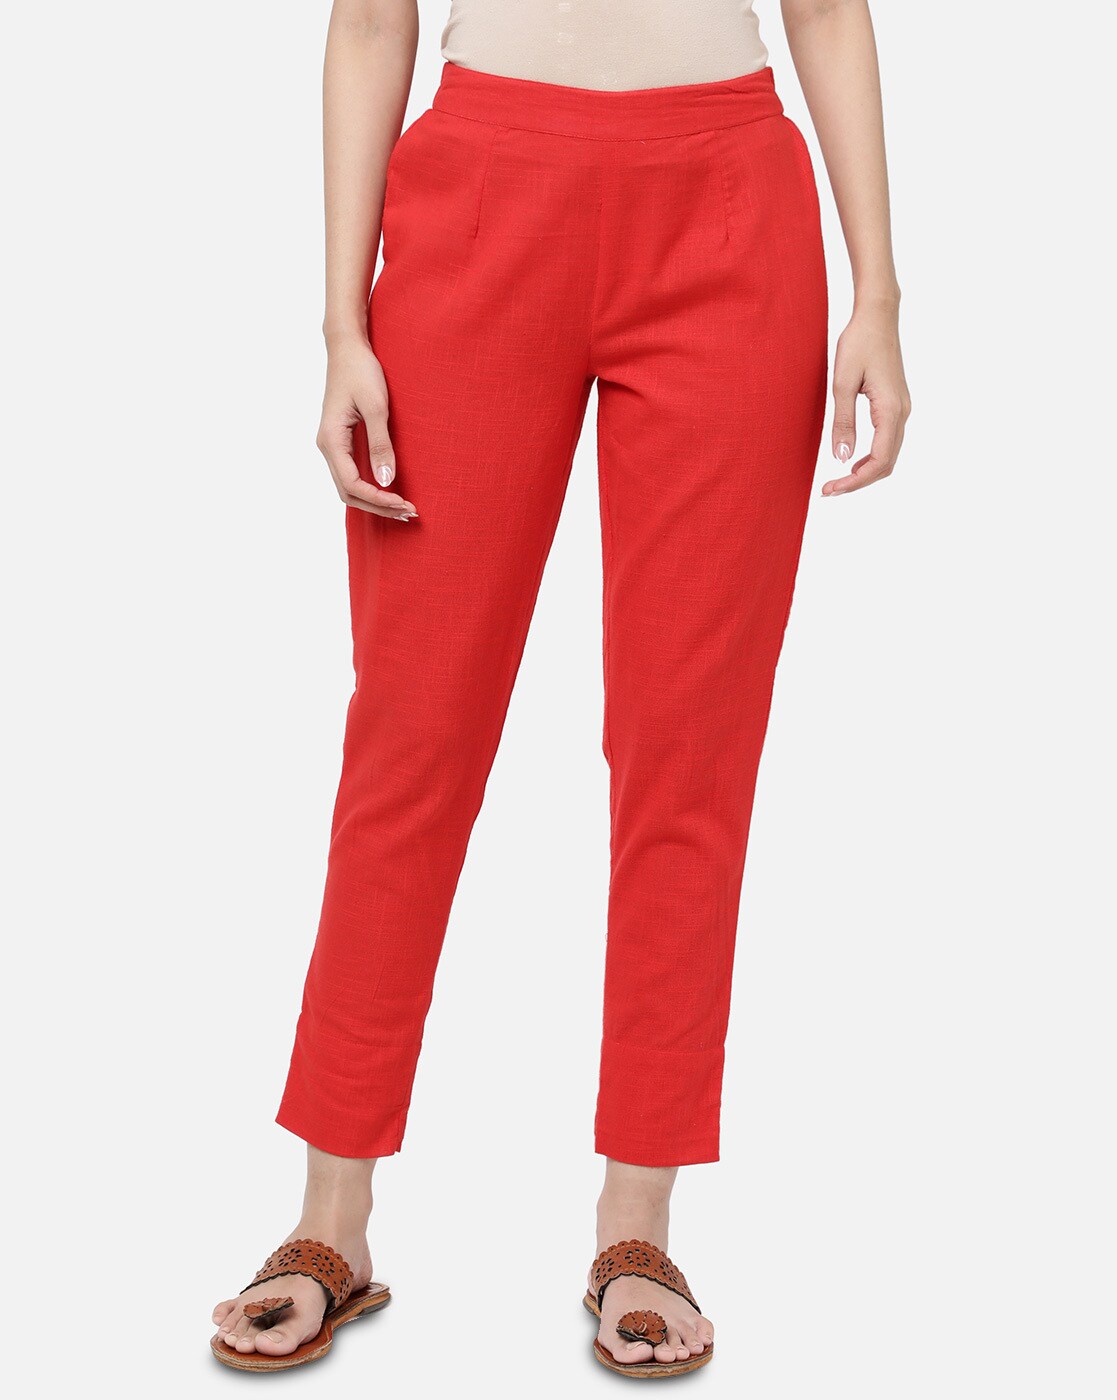 Solid Ankle Length Pant